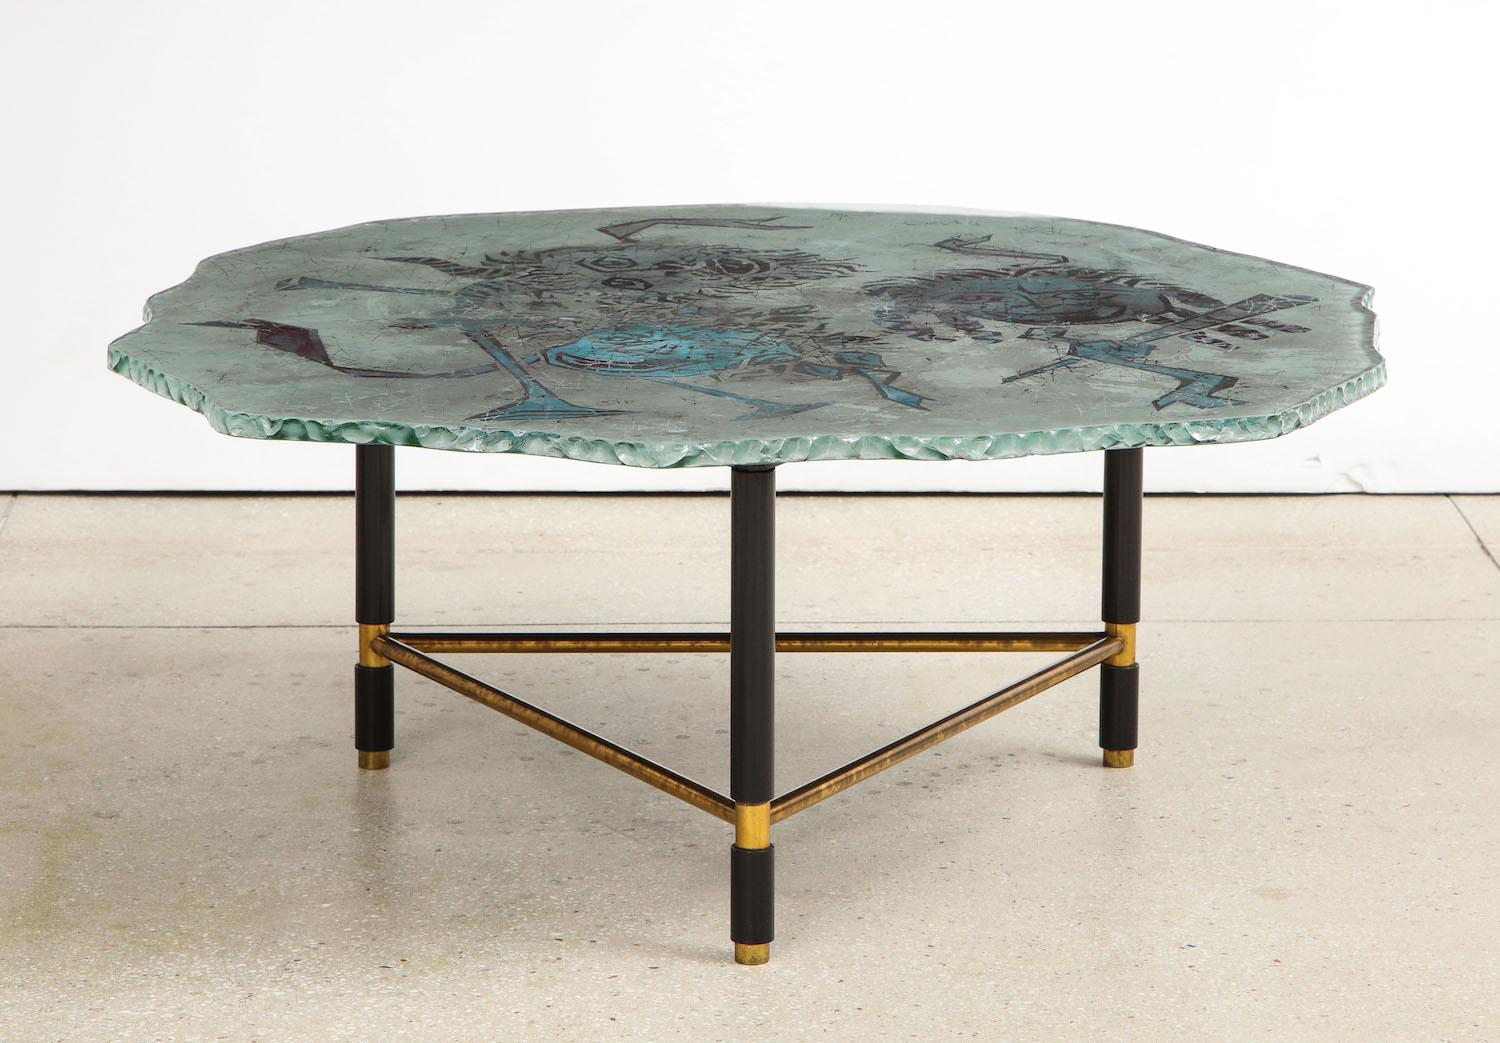 Cocktail table by Duilio Barnabé for Fontana Arte. Back-painted glass top of irregular shape and “chipped” edges. Triangular-shaped base of brass and black-painted metal. Signed “Dubé/ Fontana Arte.” Very good vintage condition with overall wear and